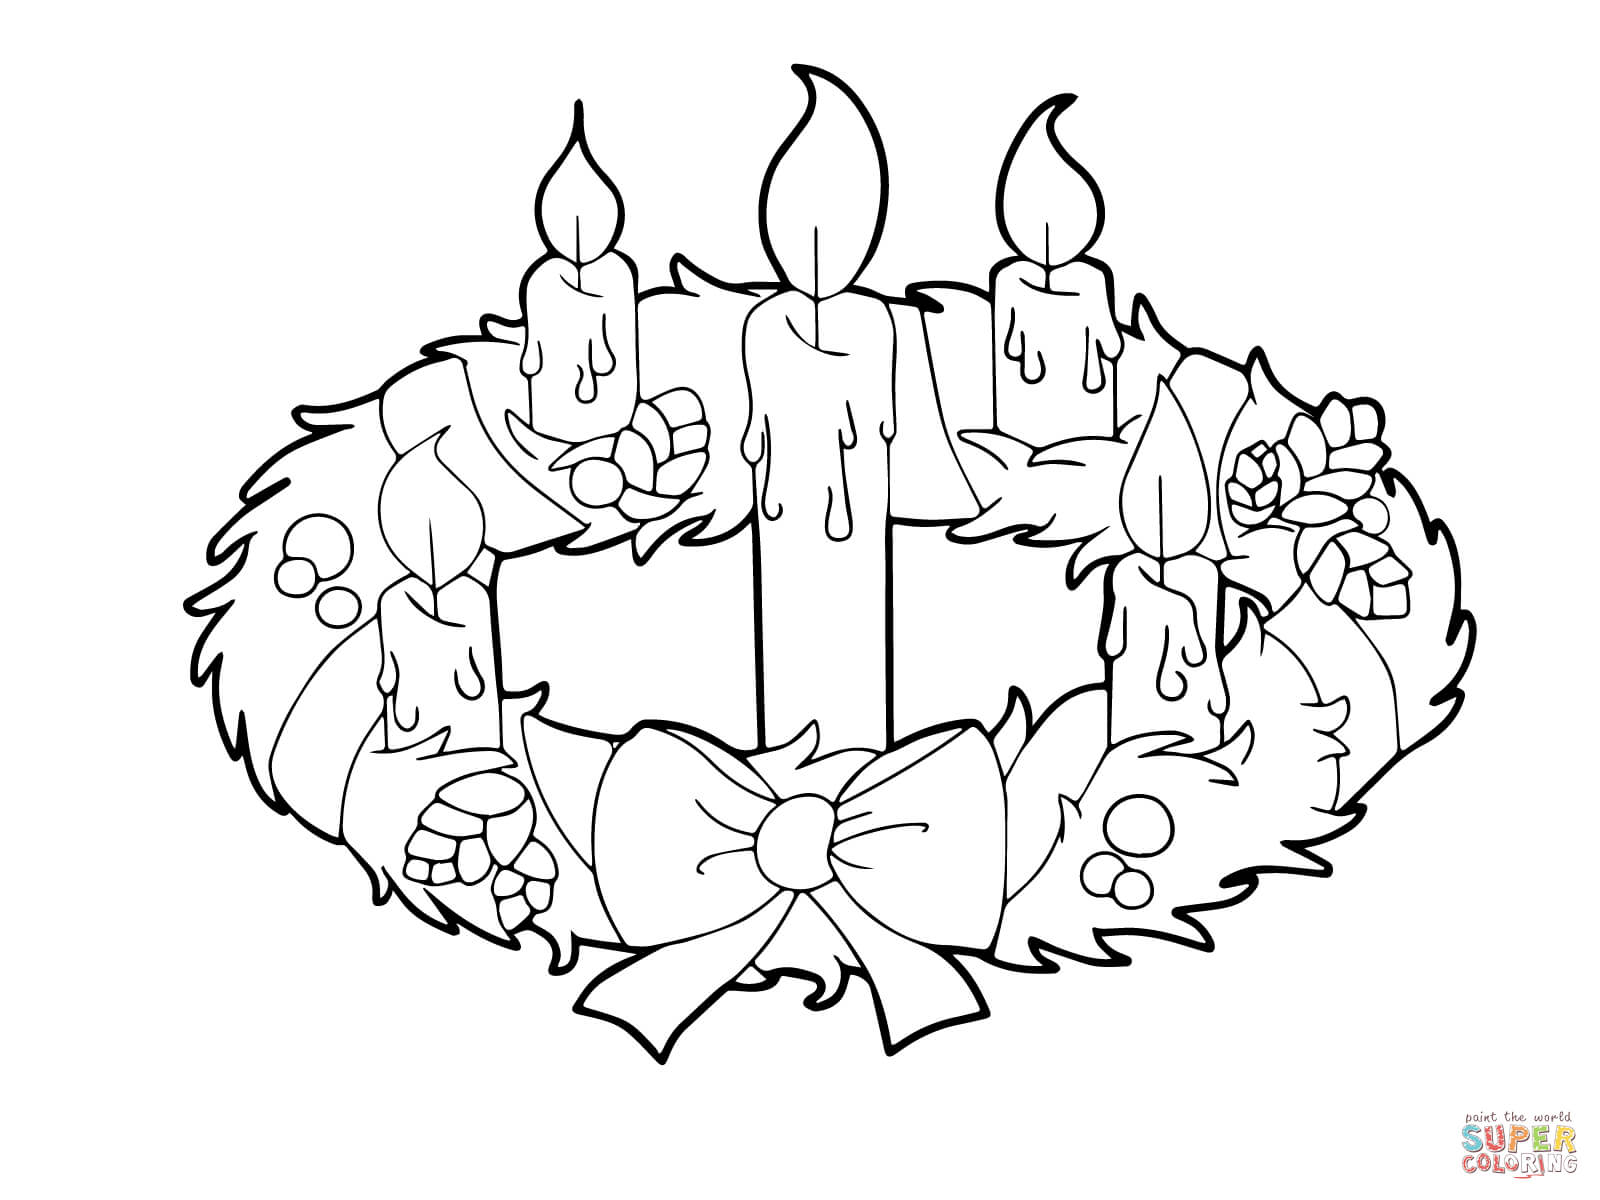 Clip Arts Related To : advent wreath clipart black and white. view al...